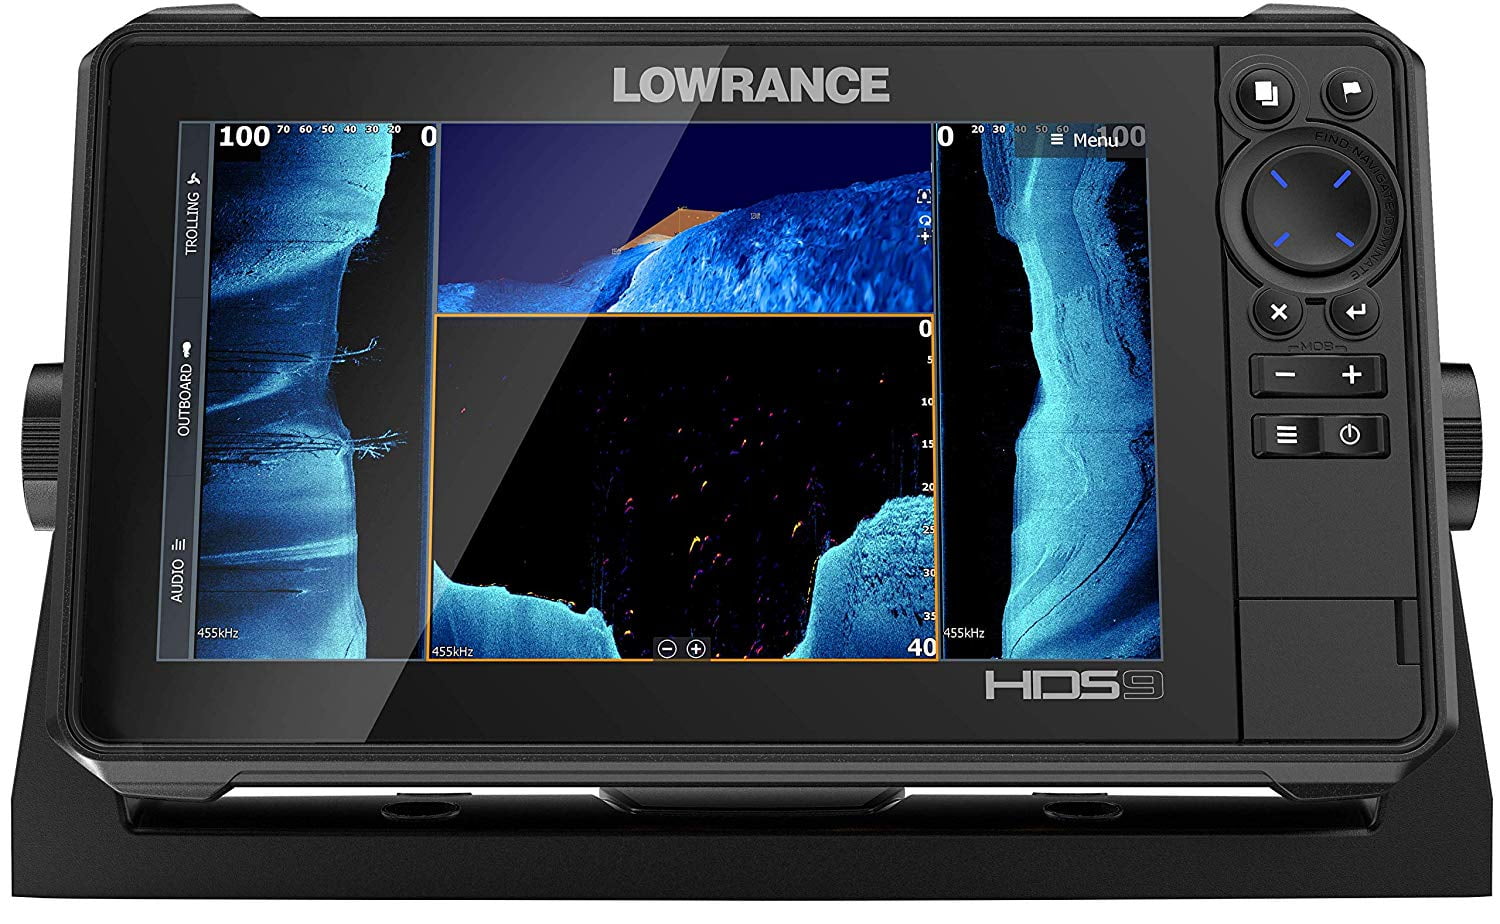 Lowrance Elite 5x color fish finder review from fishfindermounts.com -  YouTube